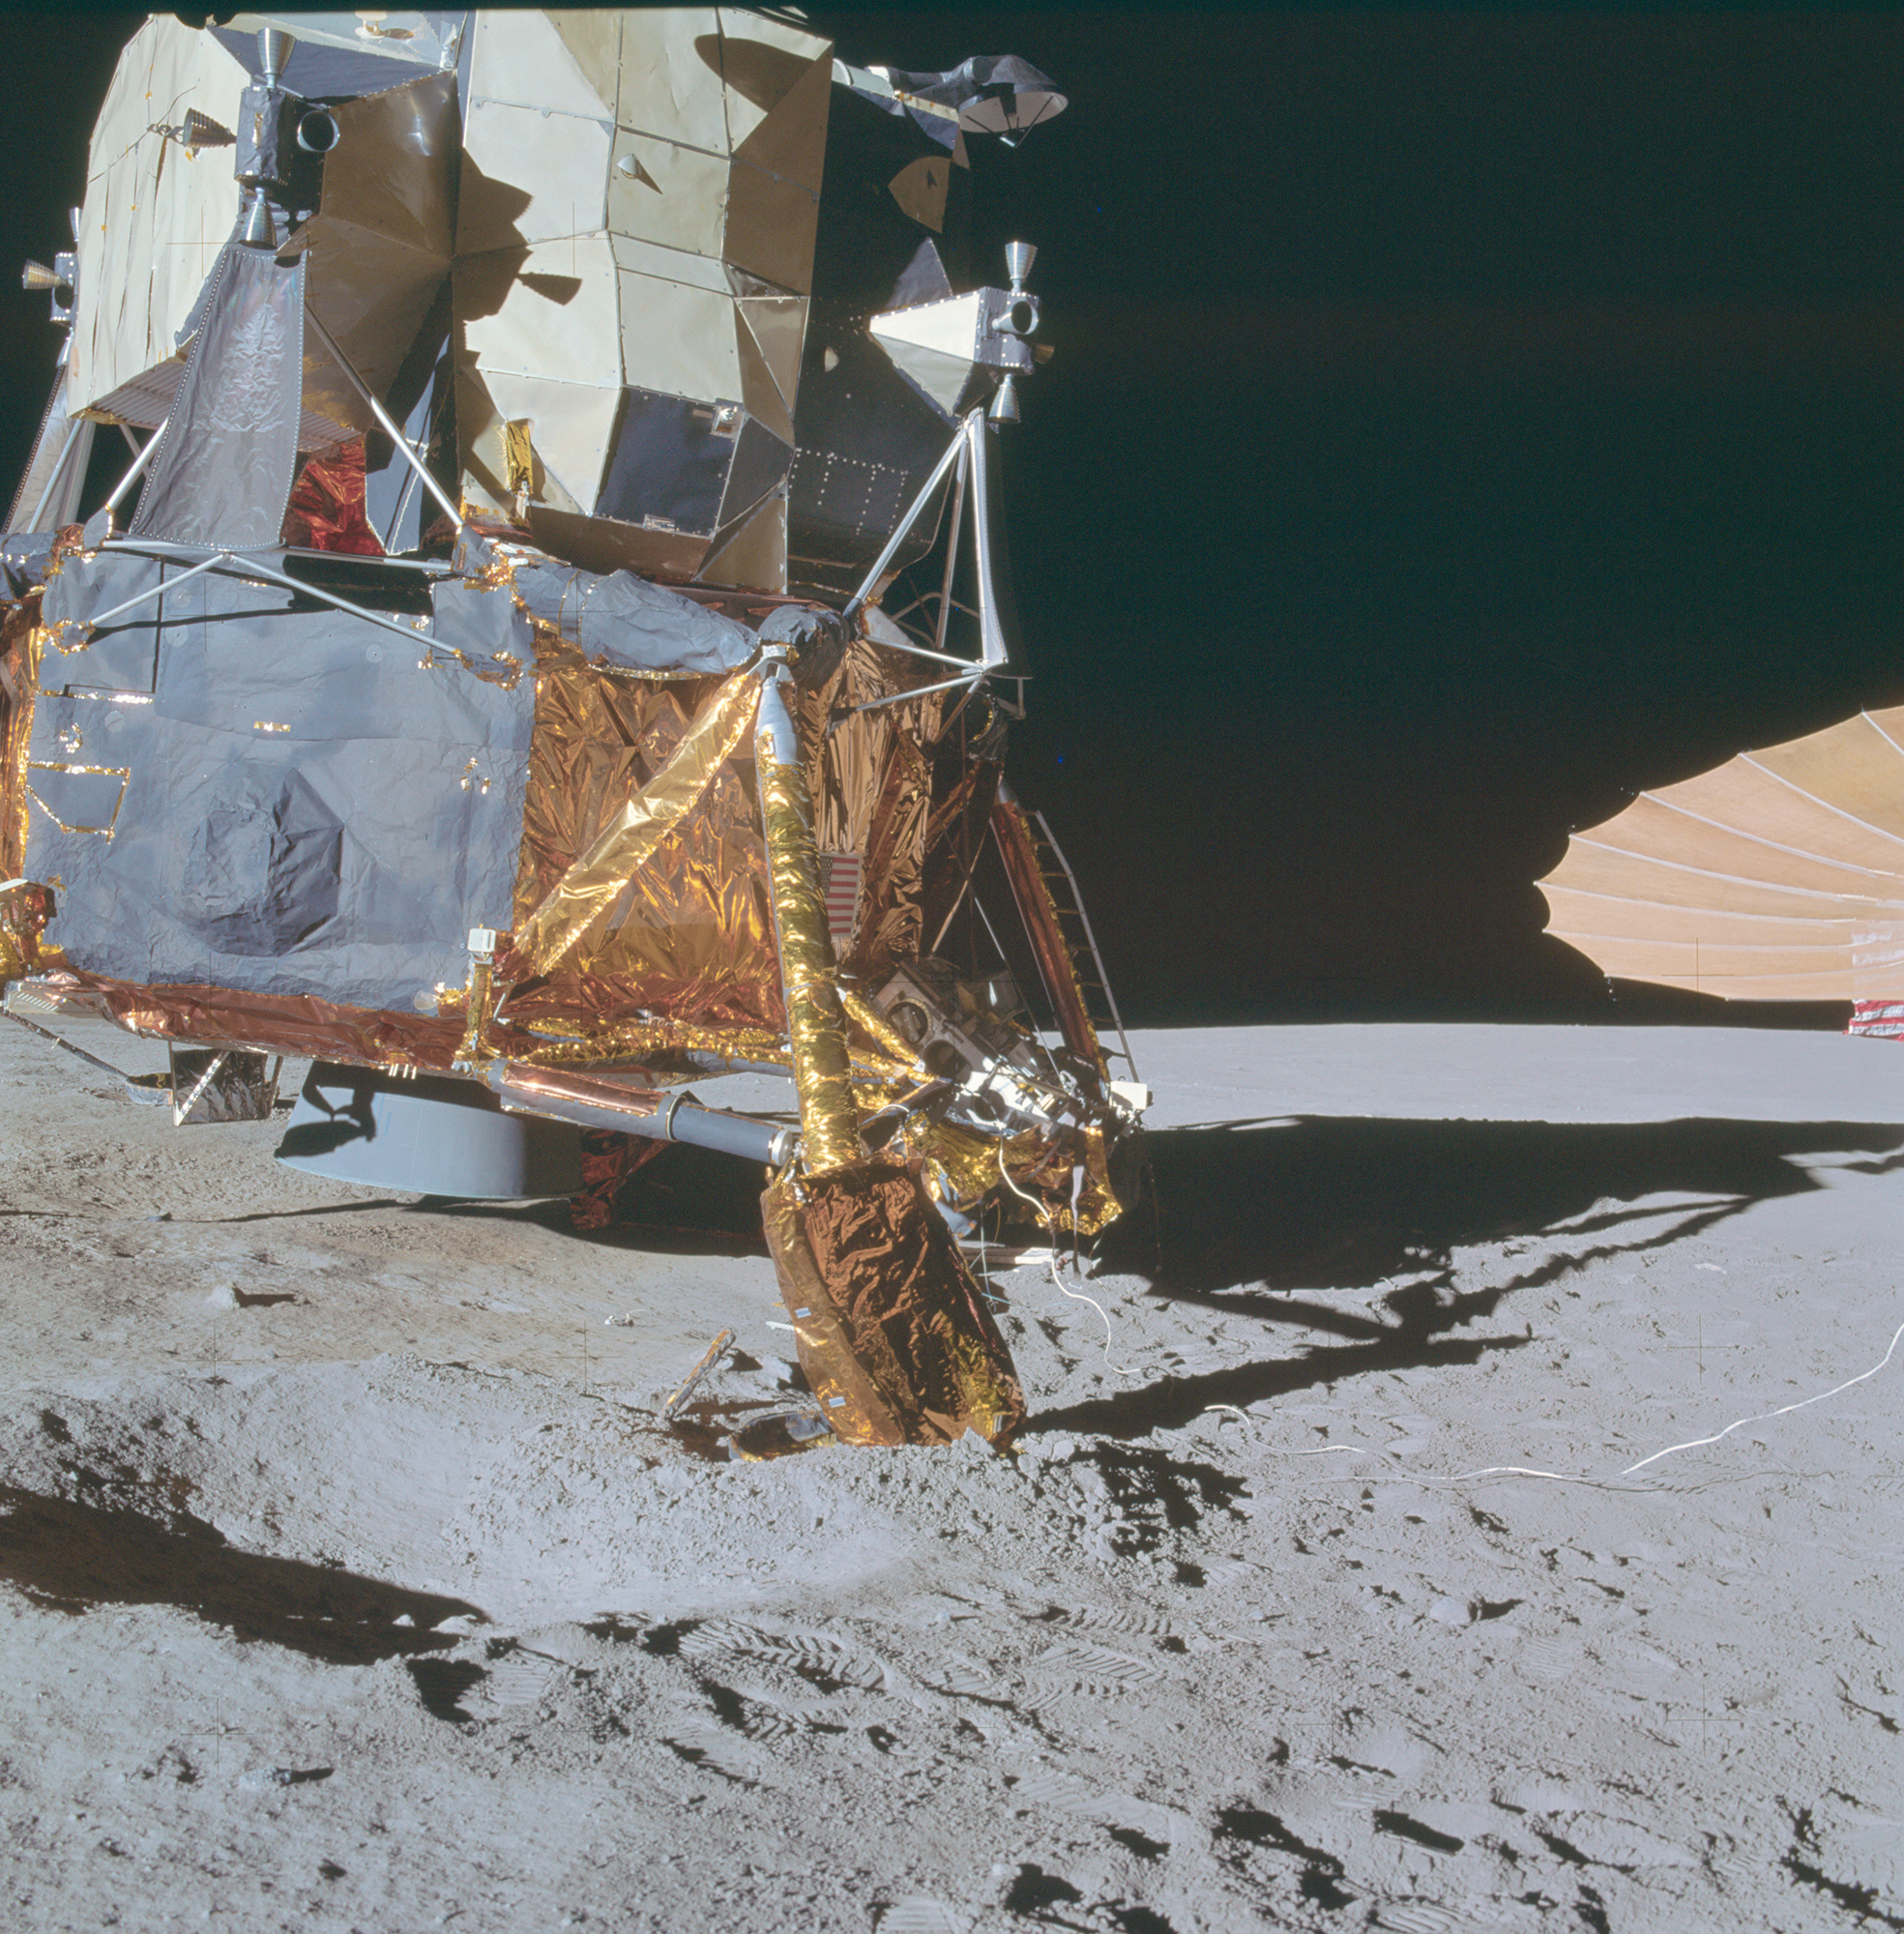 apollo-14-right-side-of-the-lunar-module-with-footpad-buried-in-crater-rim.jpg